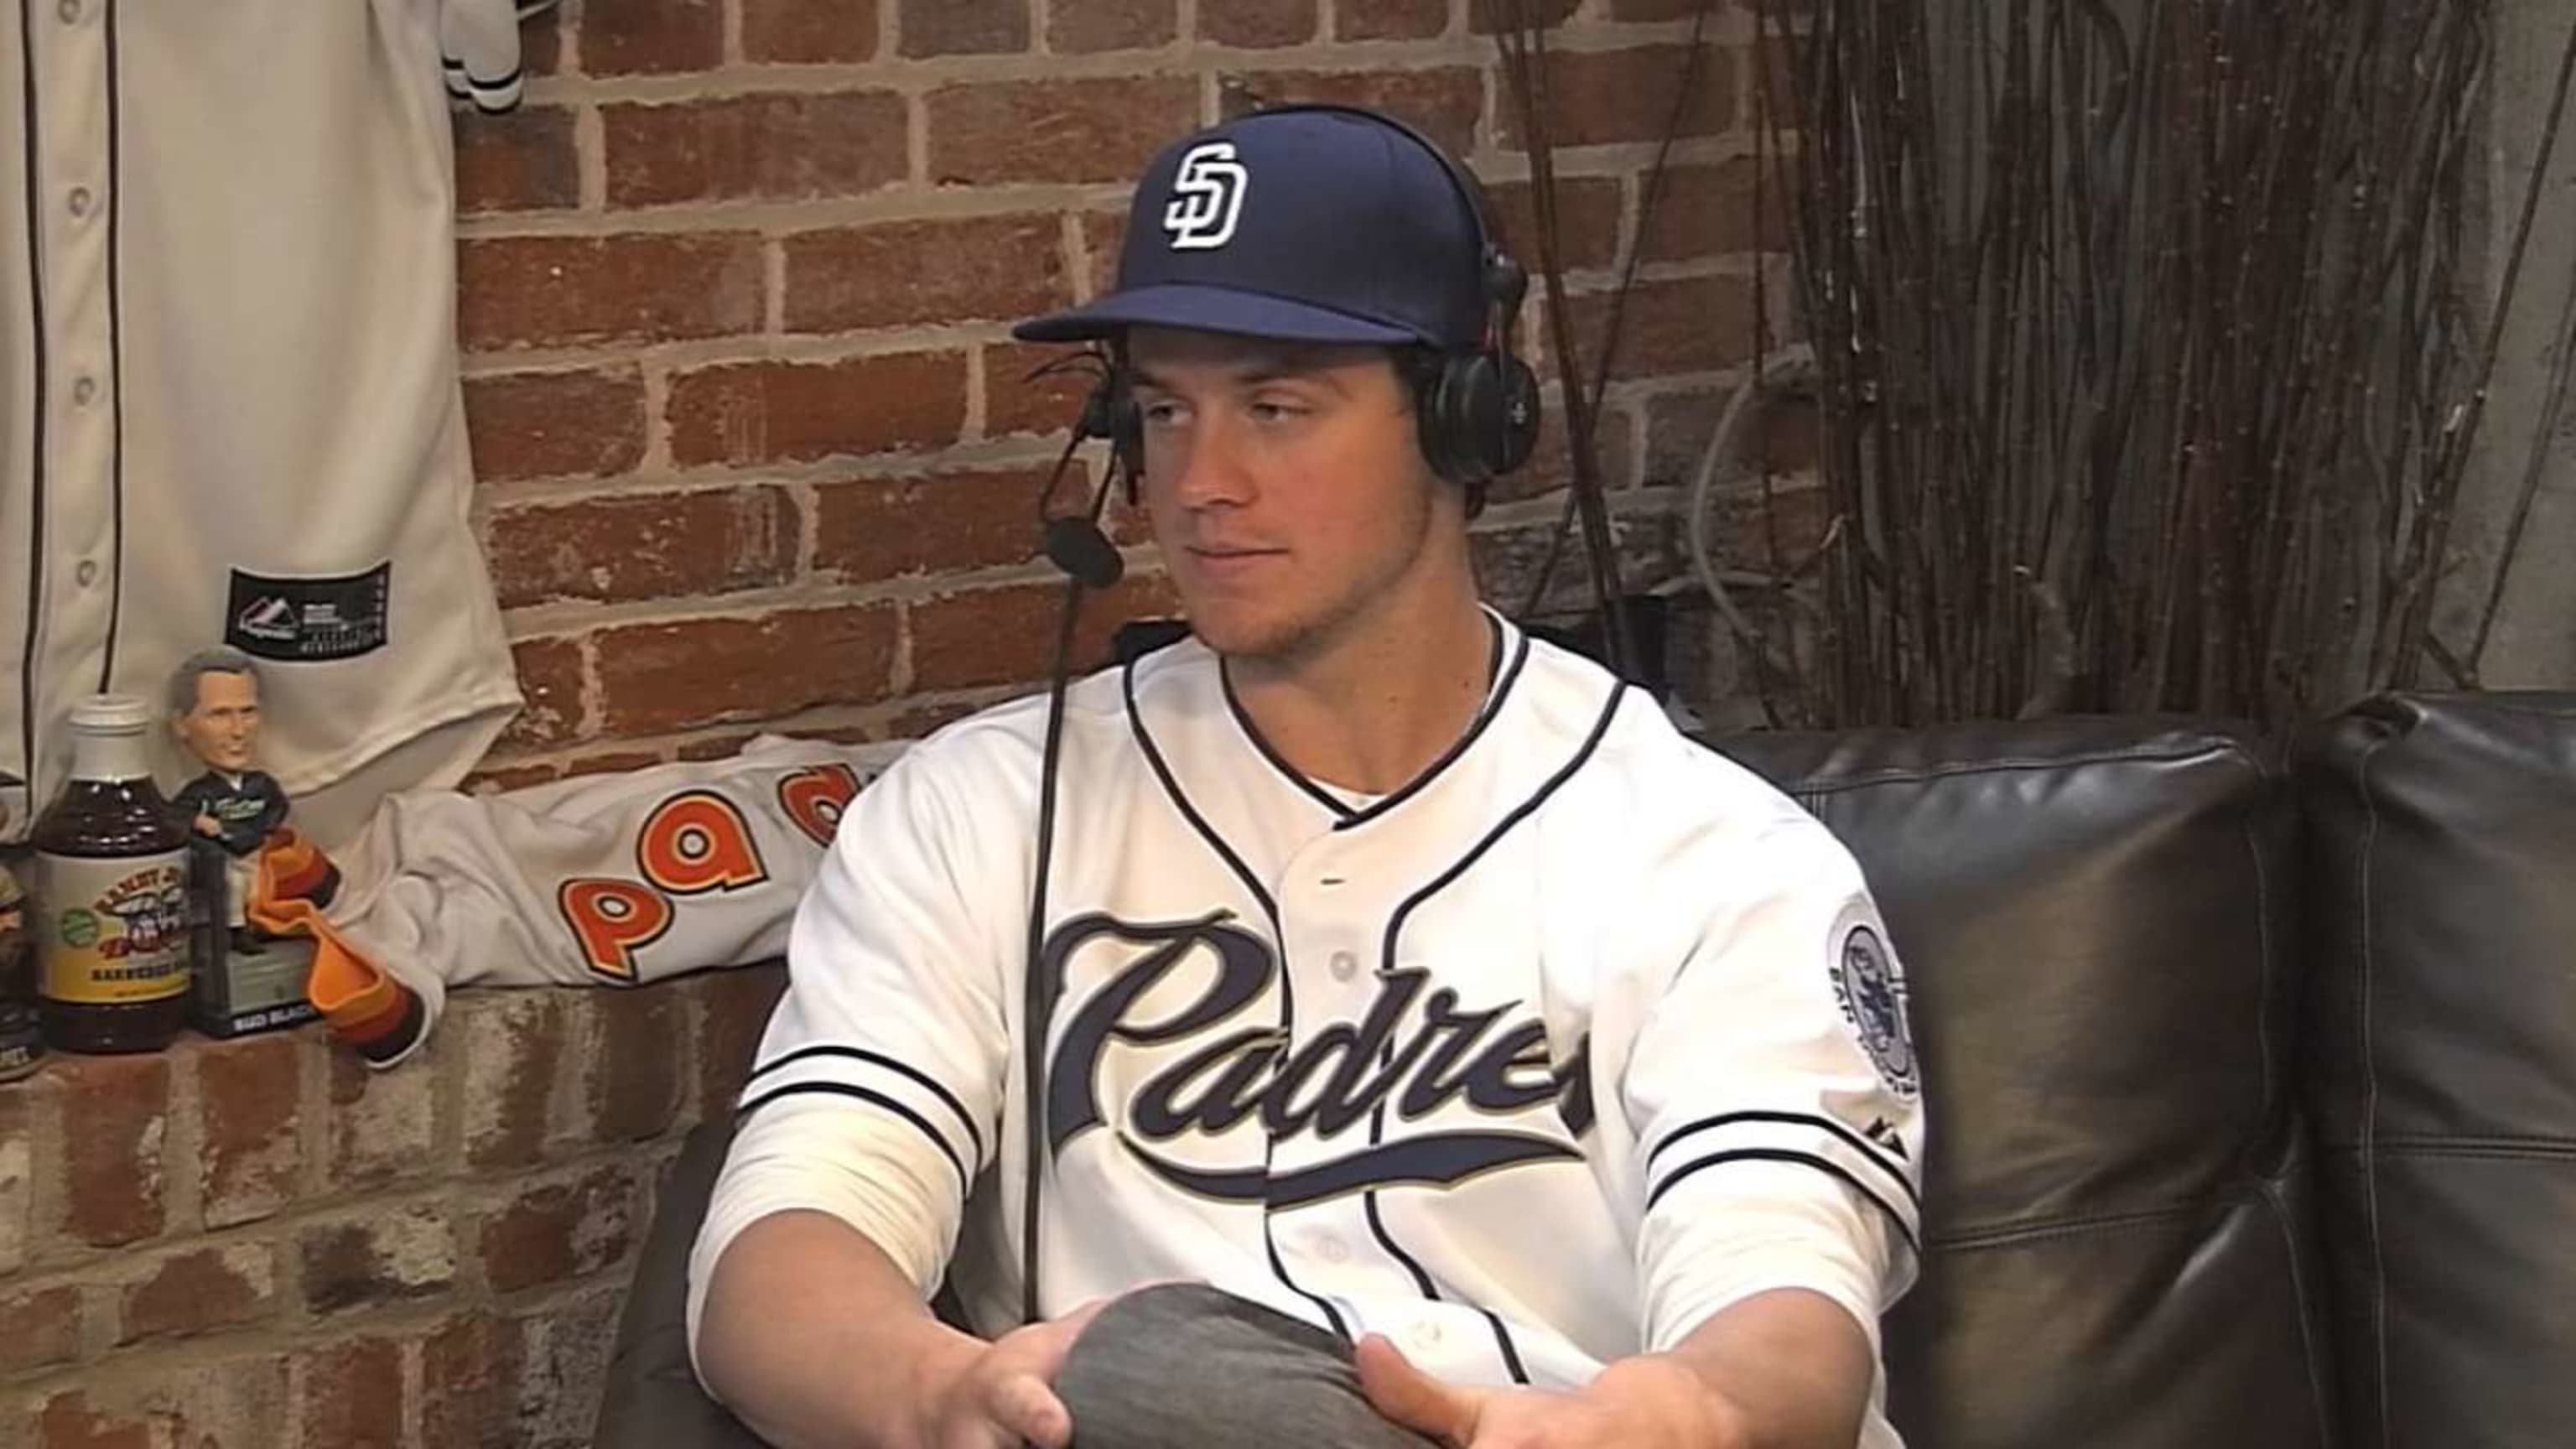 Now healthy, Wil Myers ready for next chapter with Padres